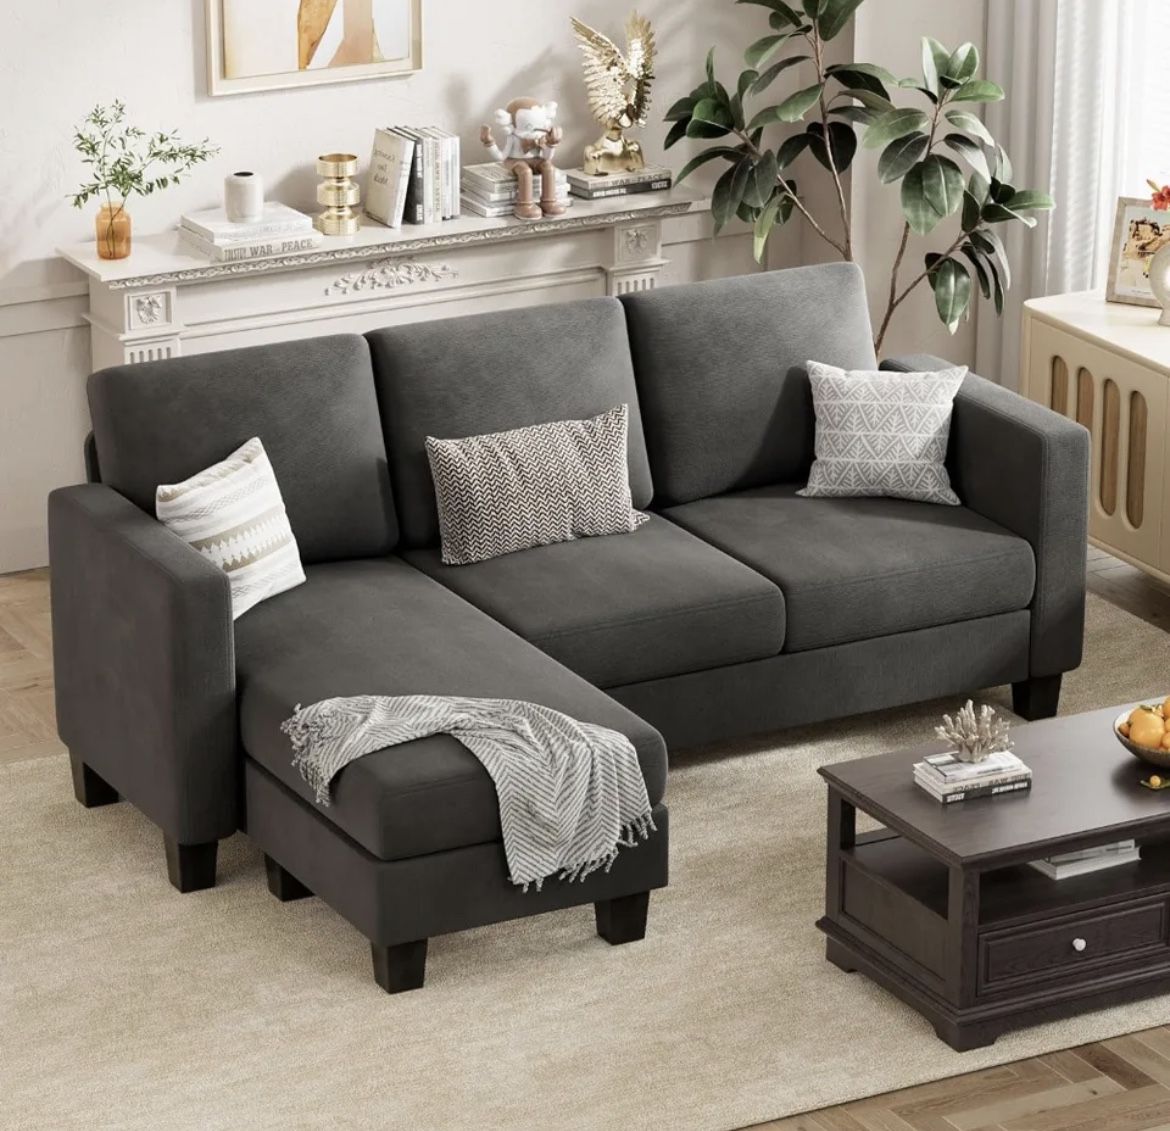 Convertible Sectional Sofa,3 Seat L-Shaped Sofa with Linen Fabric,Movable Ottoman